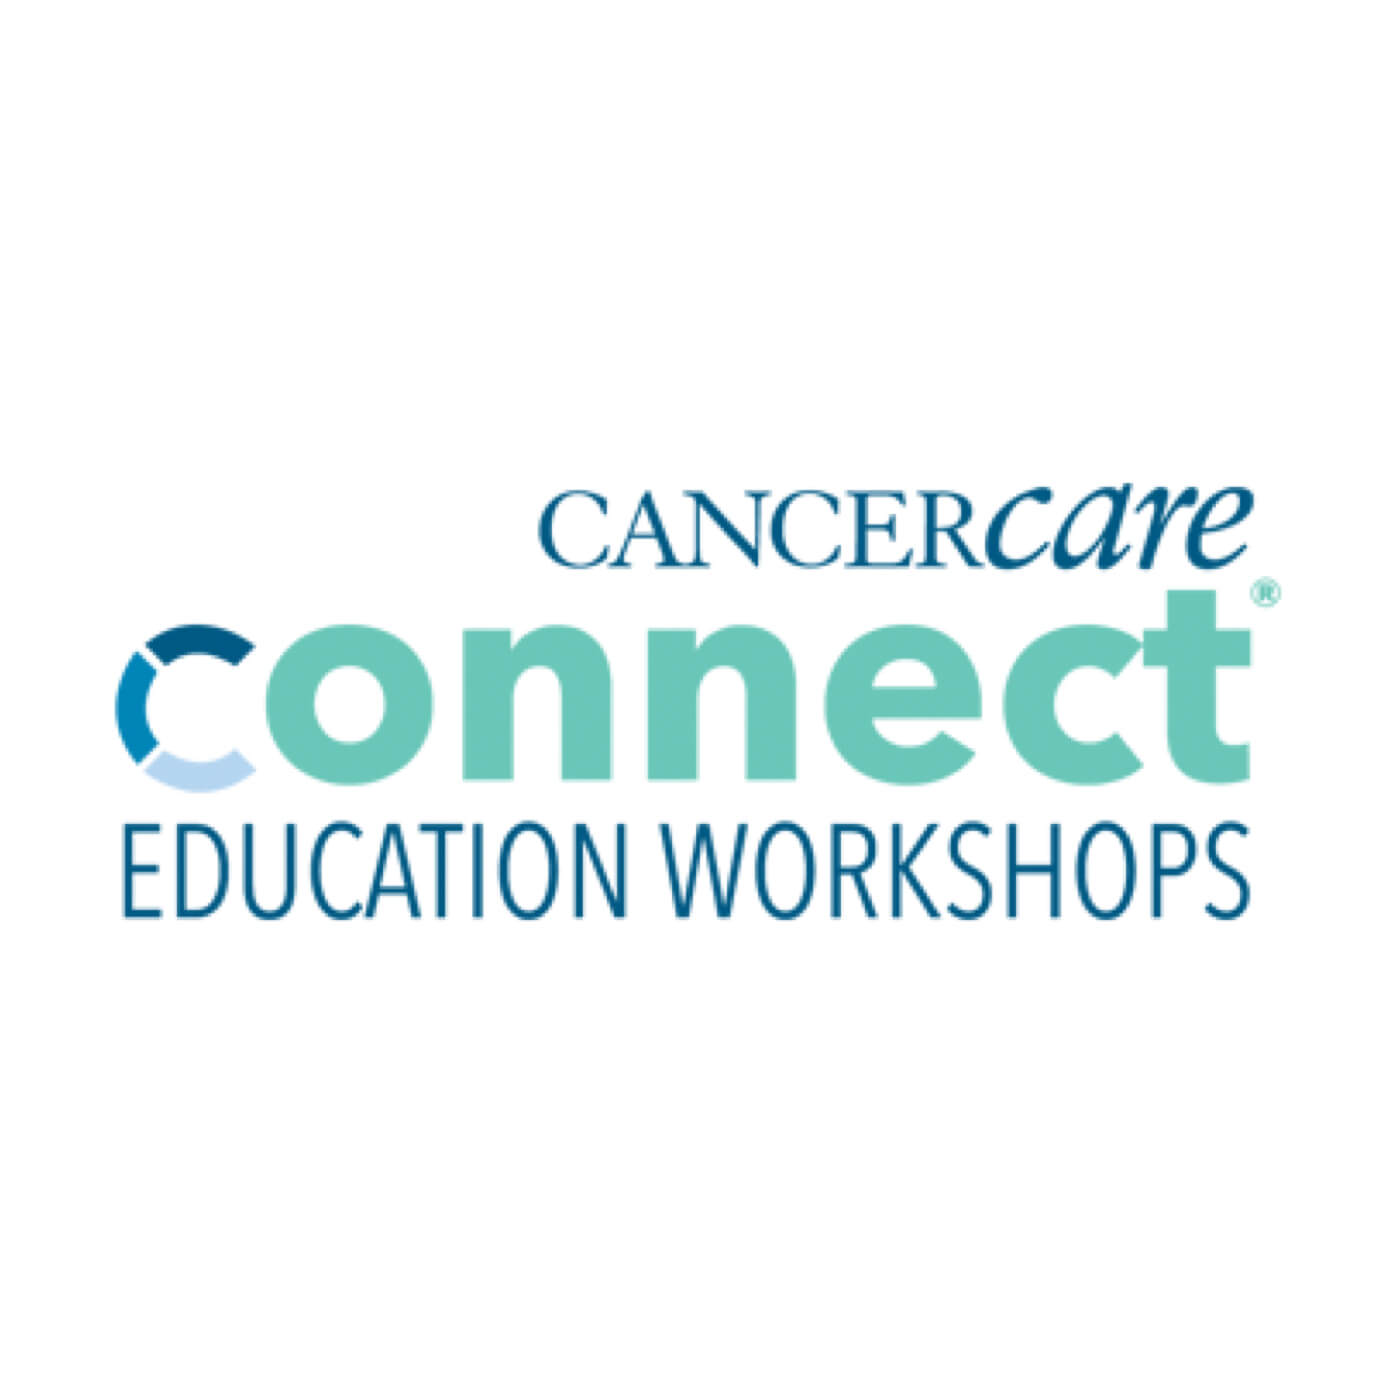 Ovarian Cancer CancerCare Connect Education Workshops